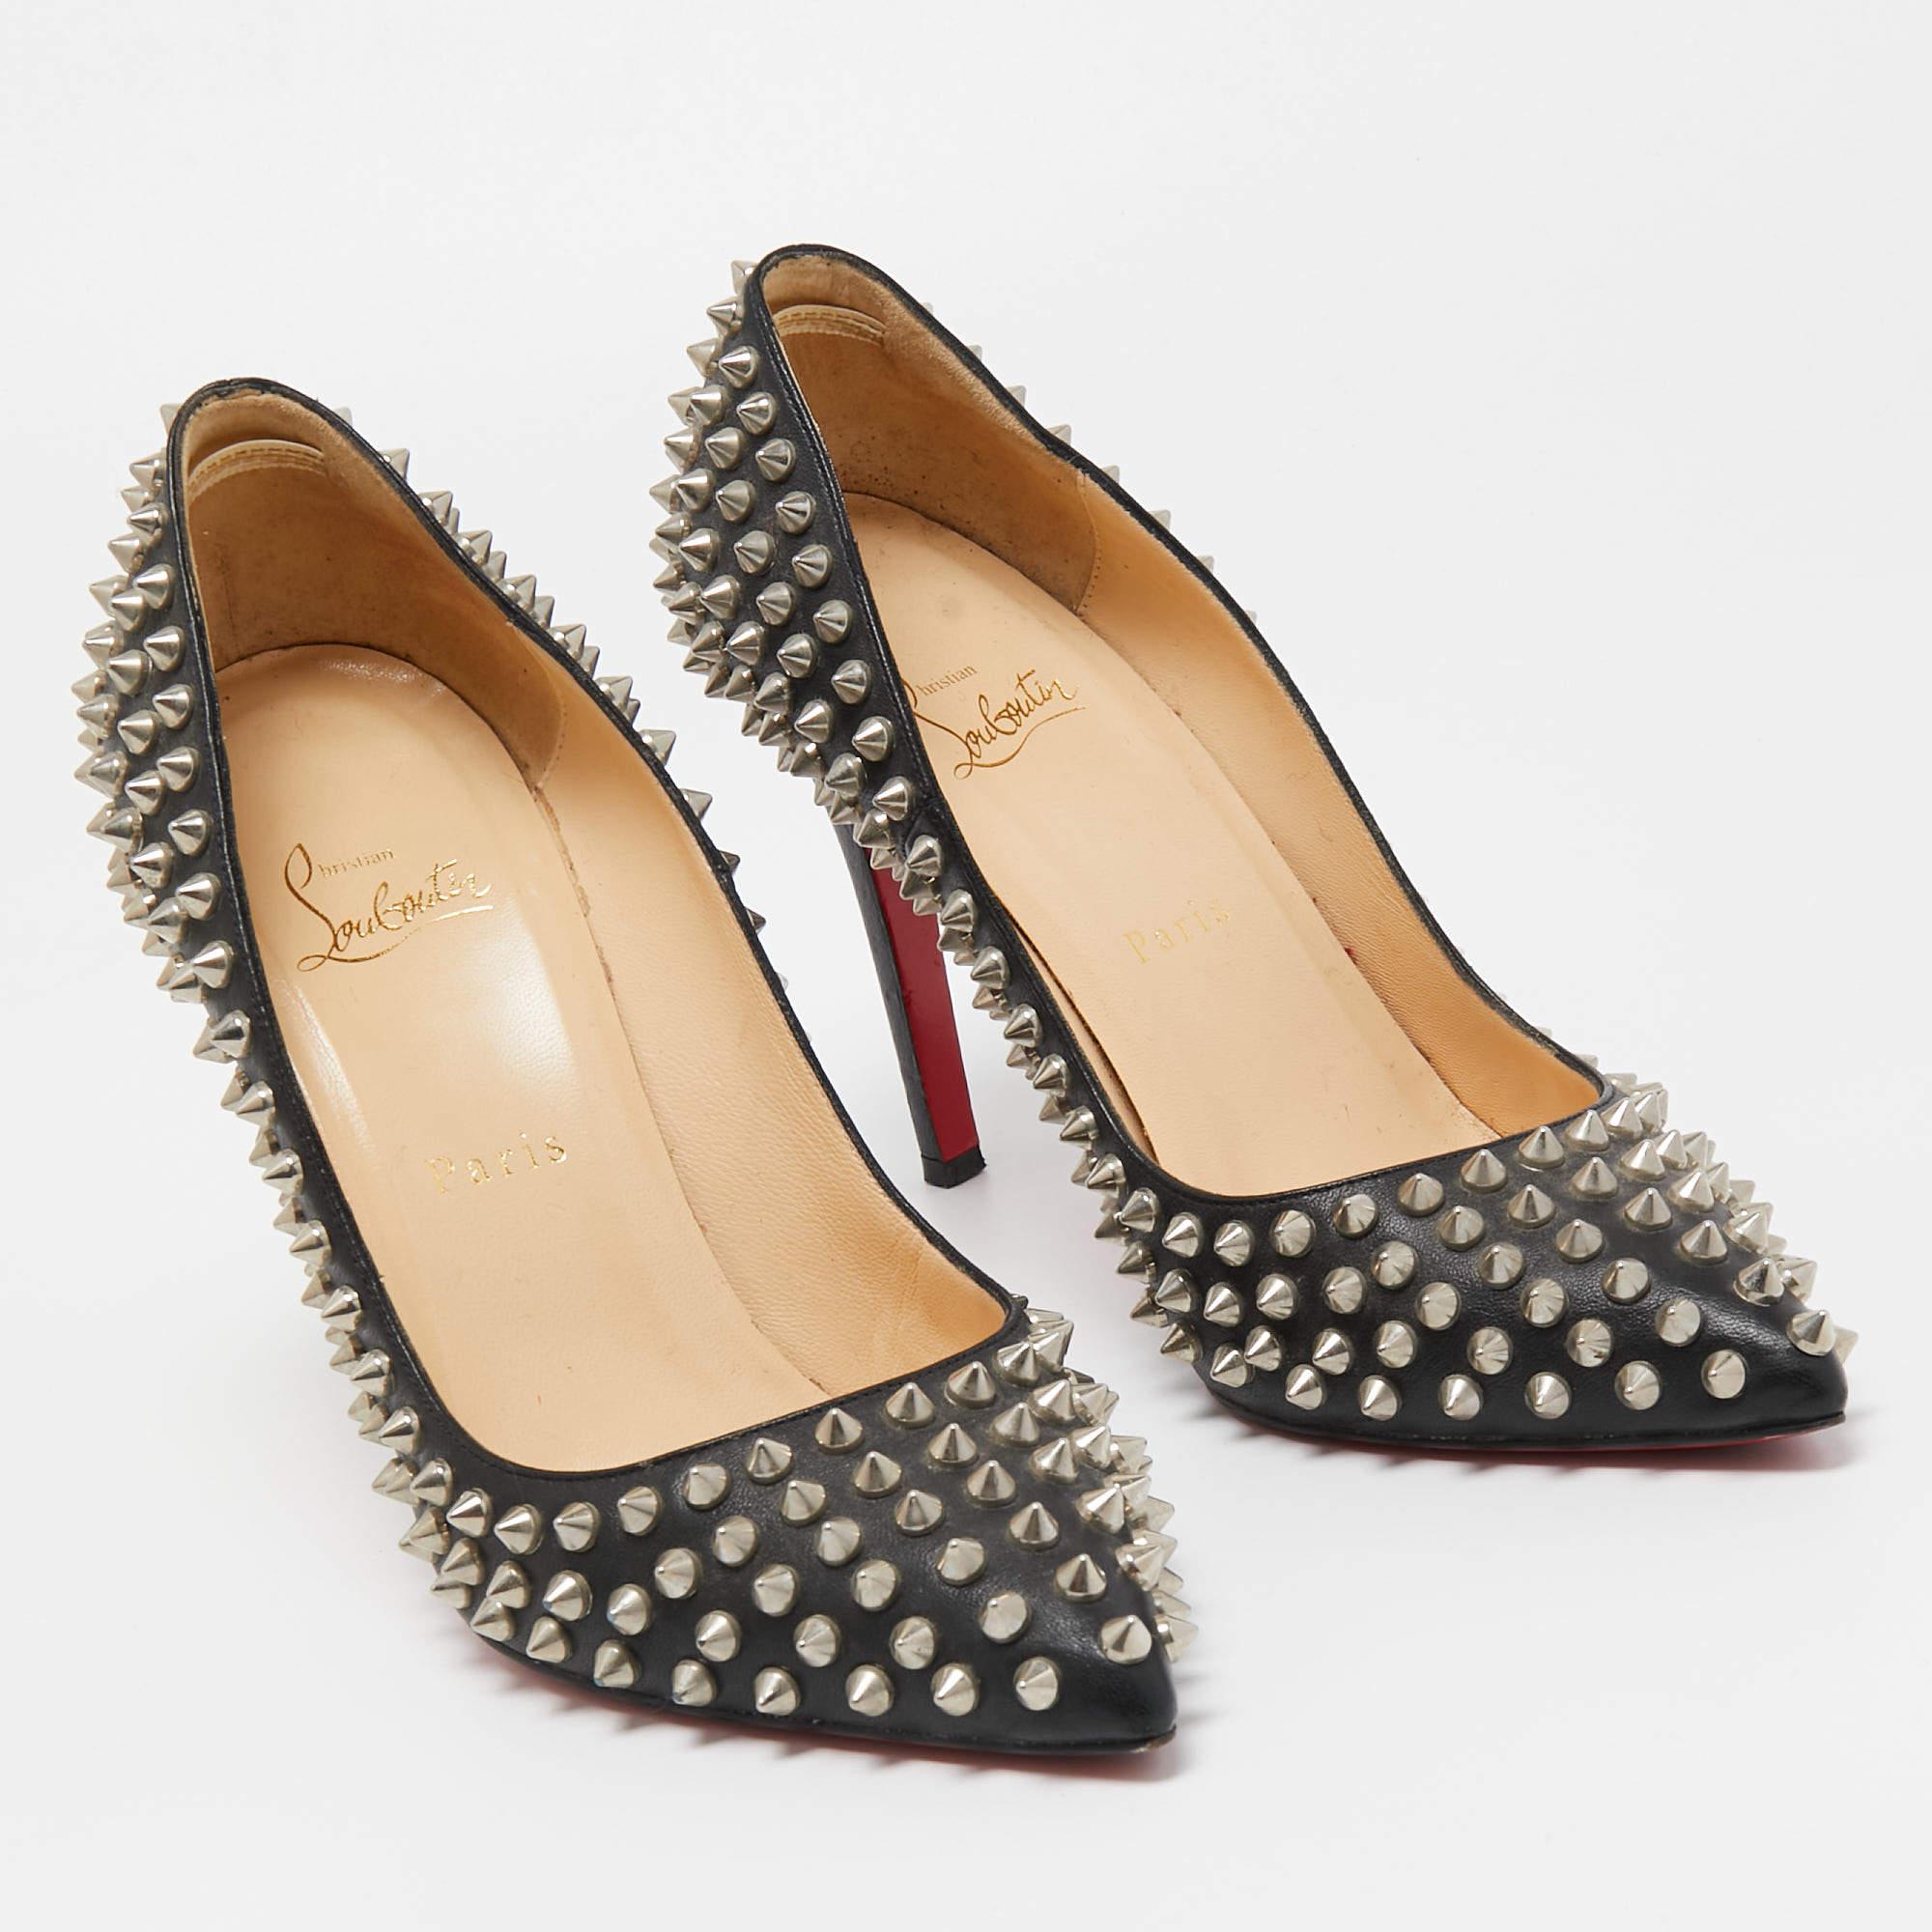 Christian Louboutin Black Leather Pigalle Spikes Pointed Toe Pumps Size 38.5 In Good Condition For Sale In Dubai, Al Qouz 2